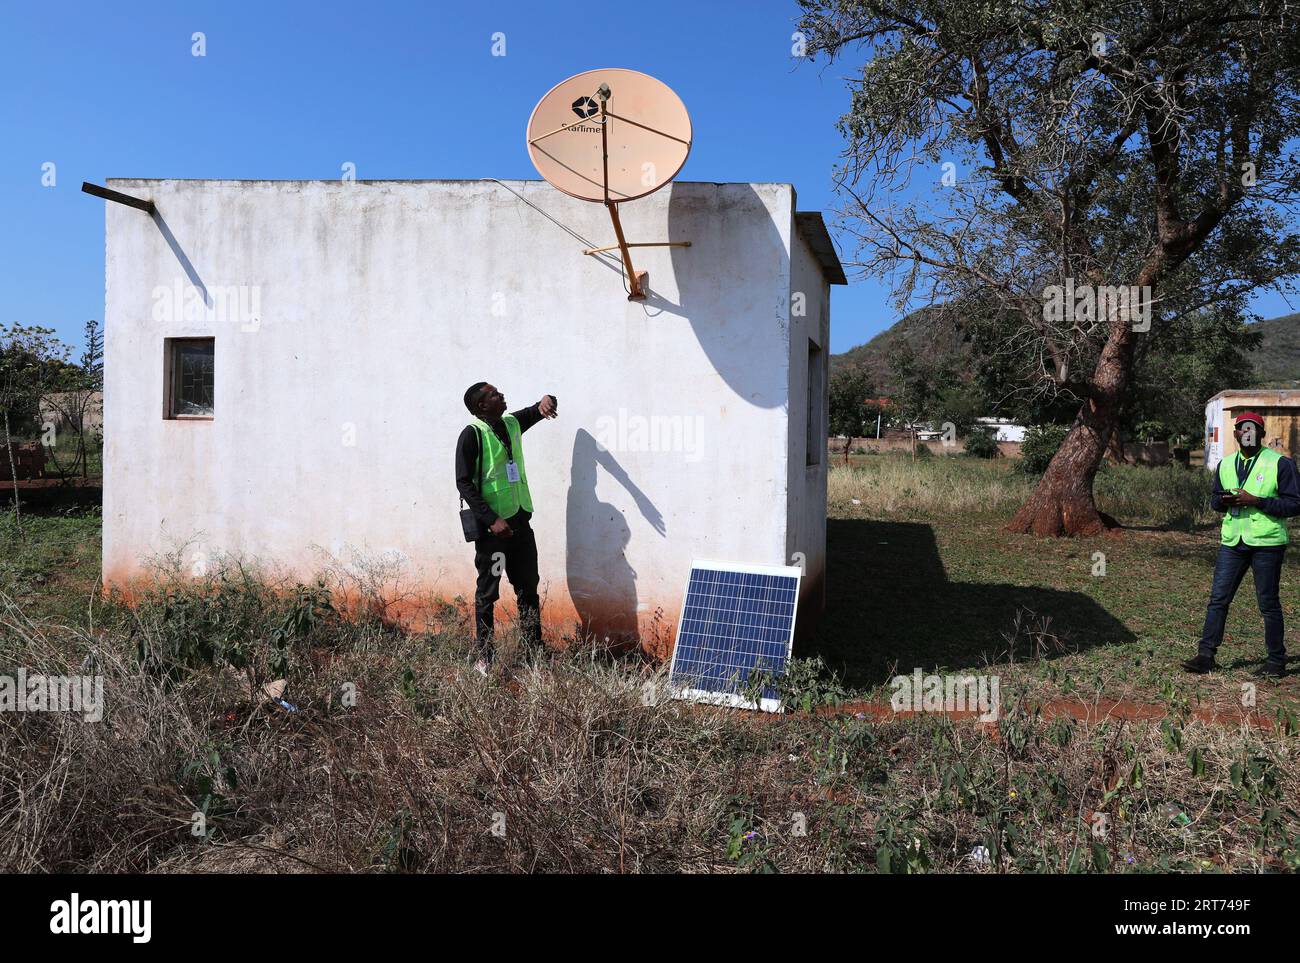 (230911) -- MAPUTO, Sept. 11, 2023 (Xinhua) -- Nunes Guardagea (L) and his colleague check Chinese-aided satellite television receiving antenna in Goba Village, Maputo Province, Mozambique, July 26, 2023. Government of Mozambique announced in May 2020 the completion of a project to bring digital satellite television signal to 1,000 villages in the country, which has benefited over 20,000 families. The project, covering all the ten provinces and the capital city of Mozambique, was co-funded by China and implemented by the Chinese electronics and media company StarTimes. It trained work force Stock Photo